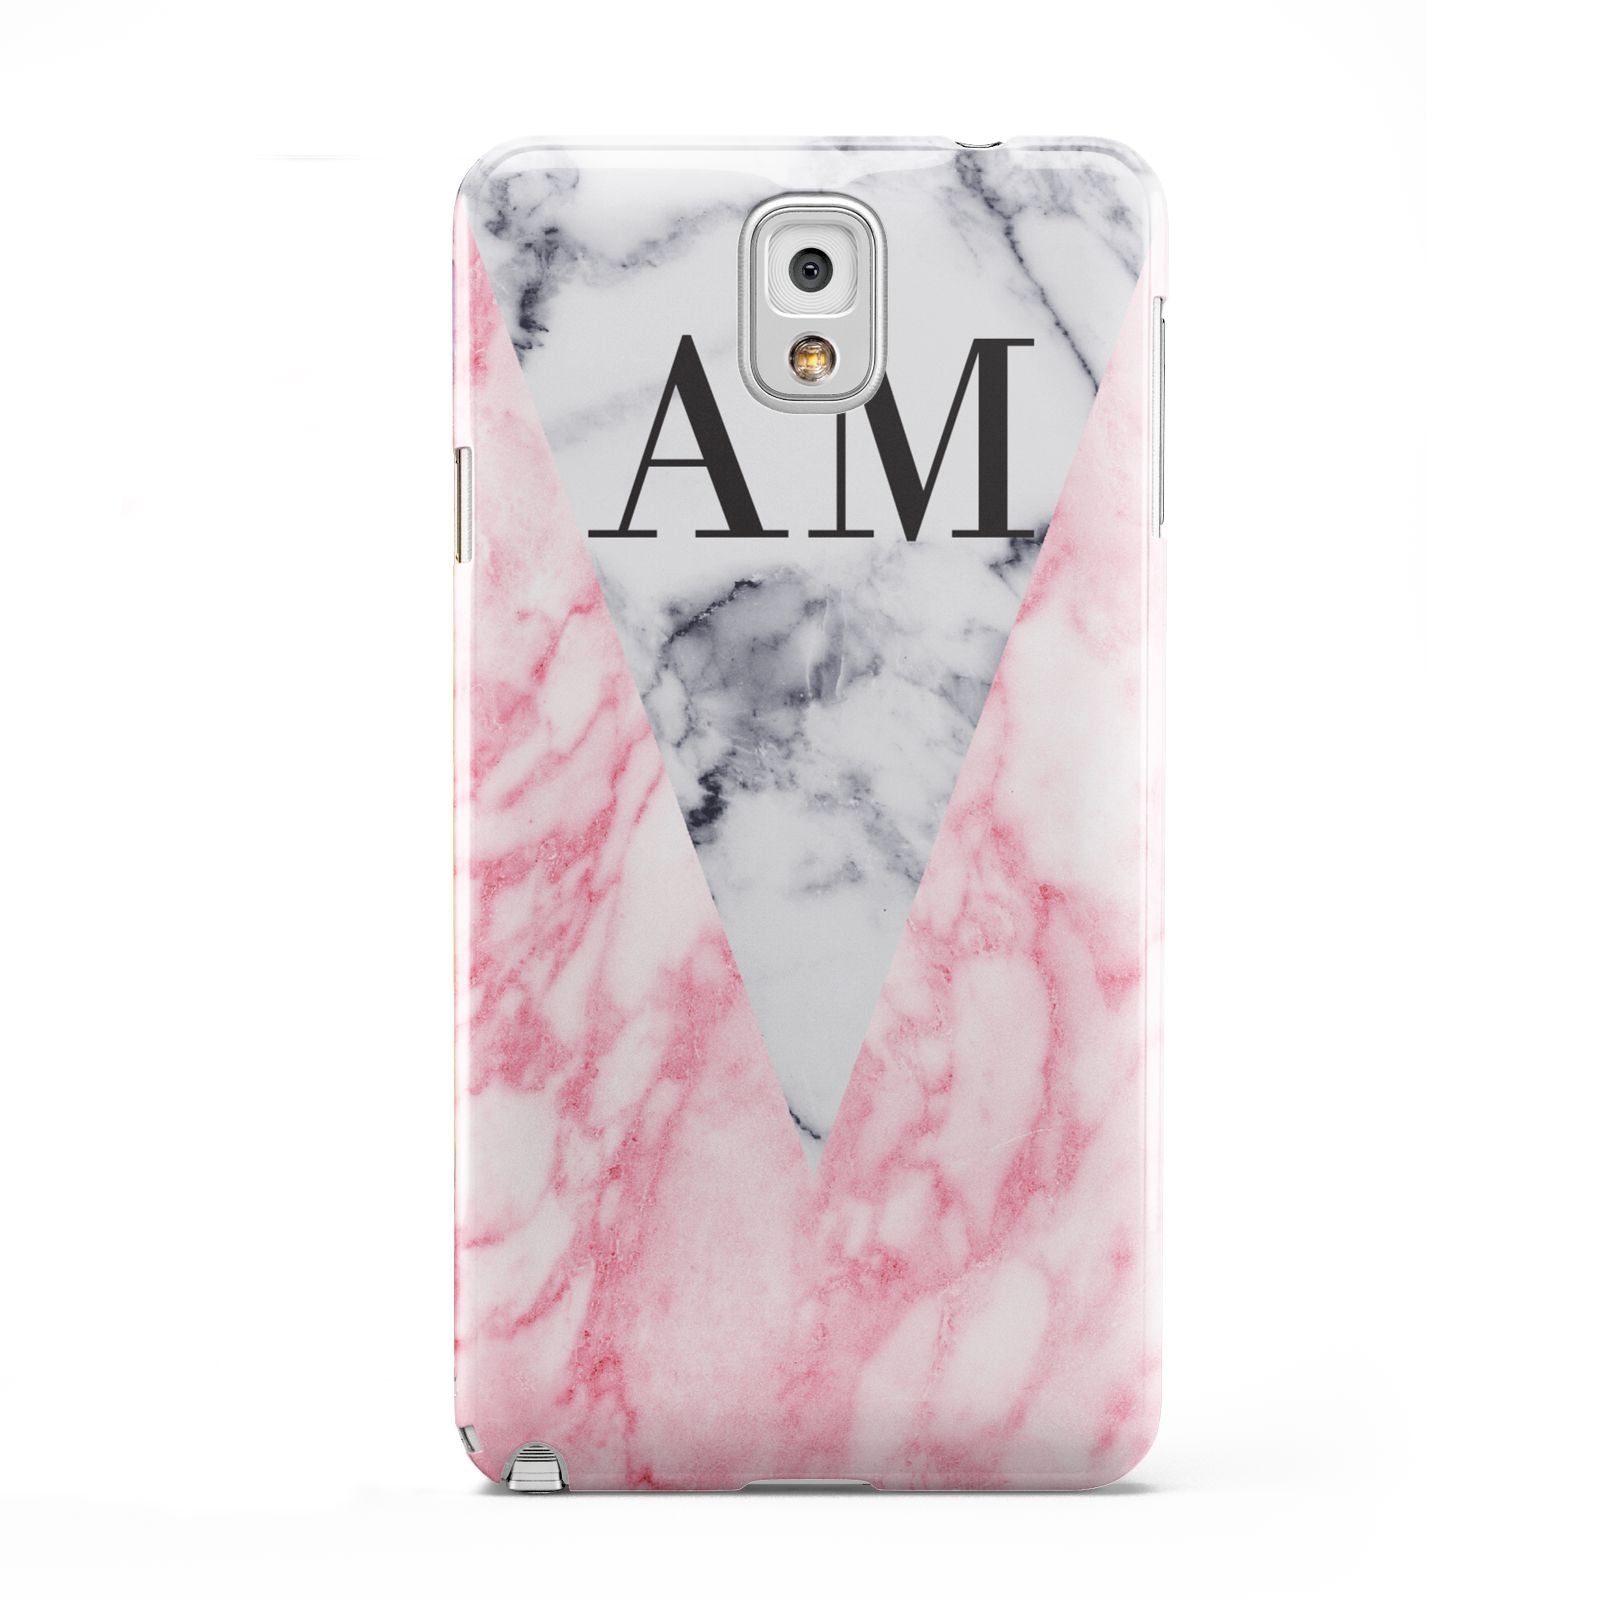 Personalised Grey Inset Marble Initials Samsung Galaxy Note 3 Case